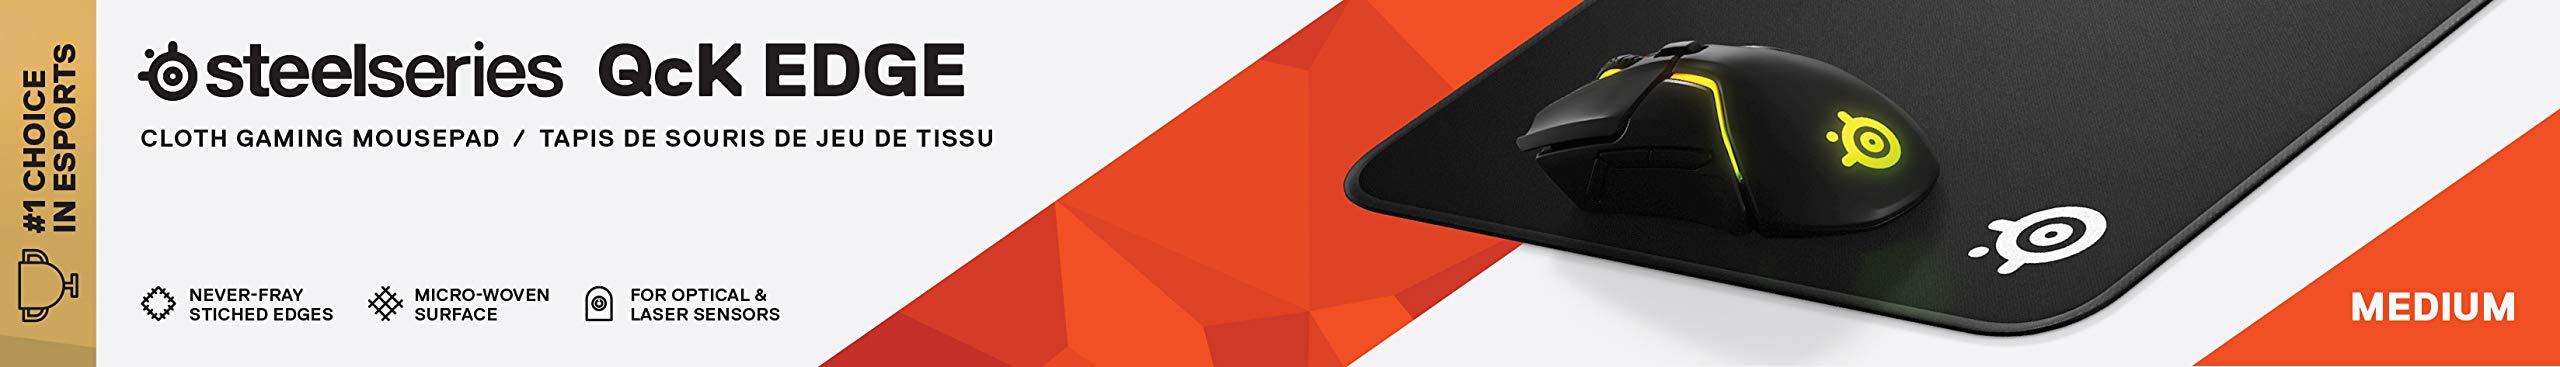 SteelSeries QcK Gaming Mouse Pad - Medium Stitched Edge Cloth - Extra Durable - Optimized For Gaming Sensors - Black